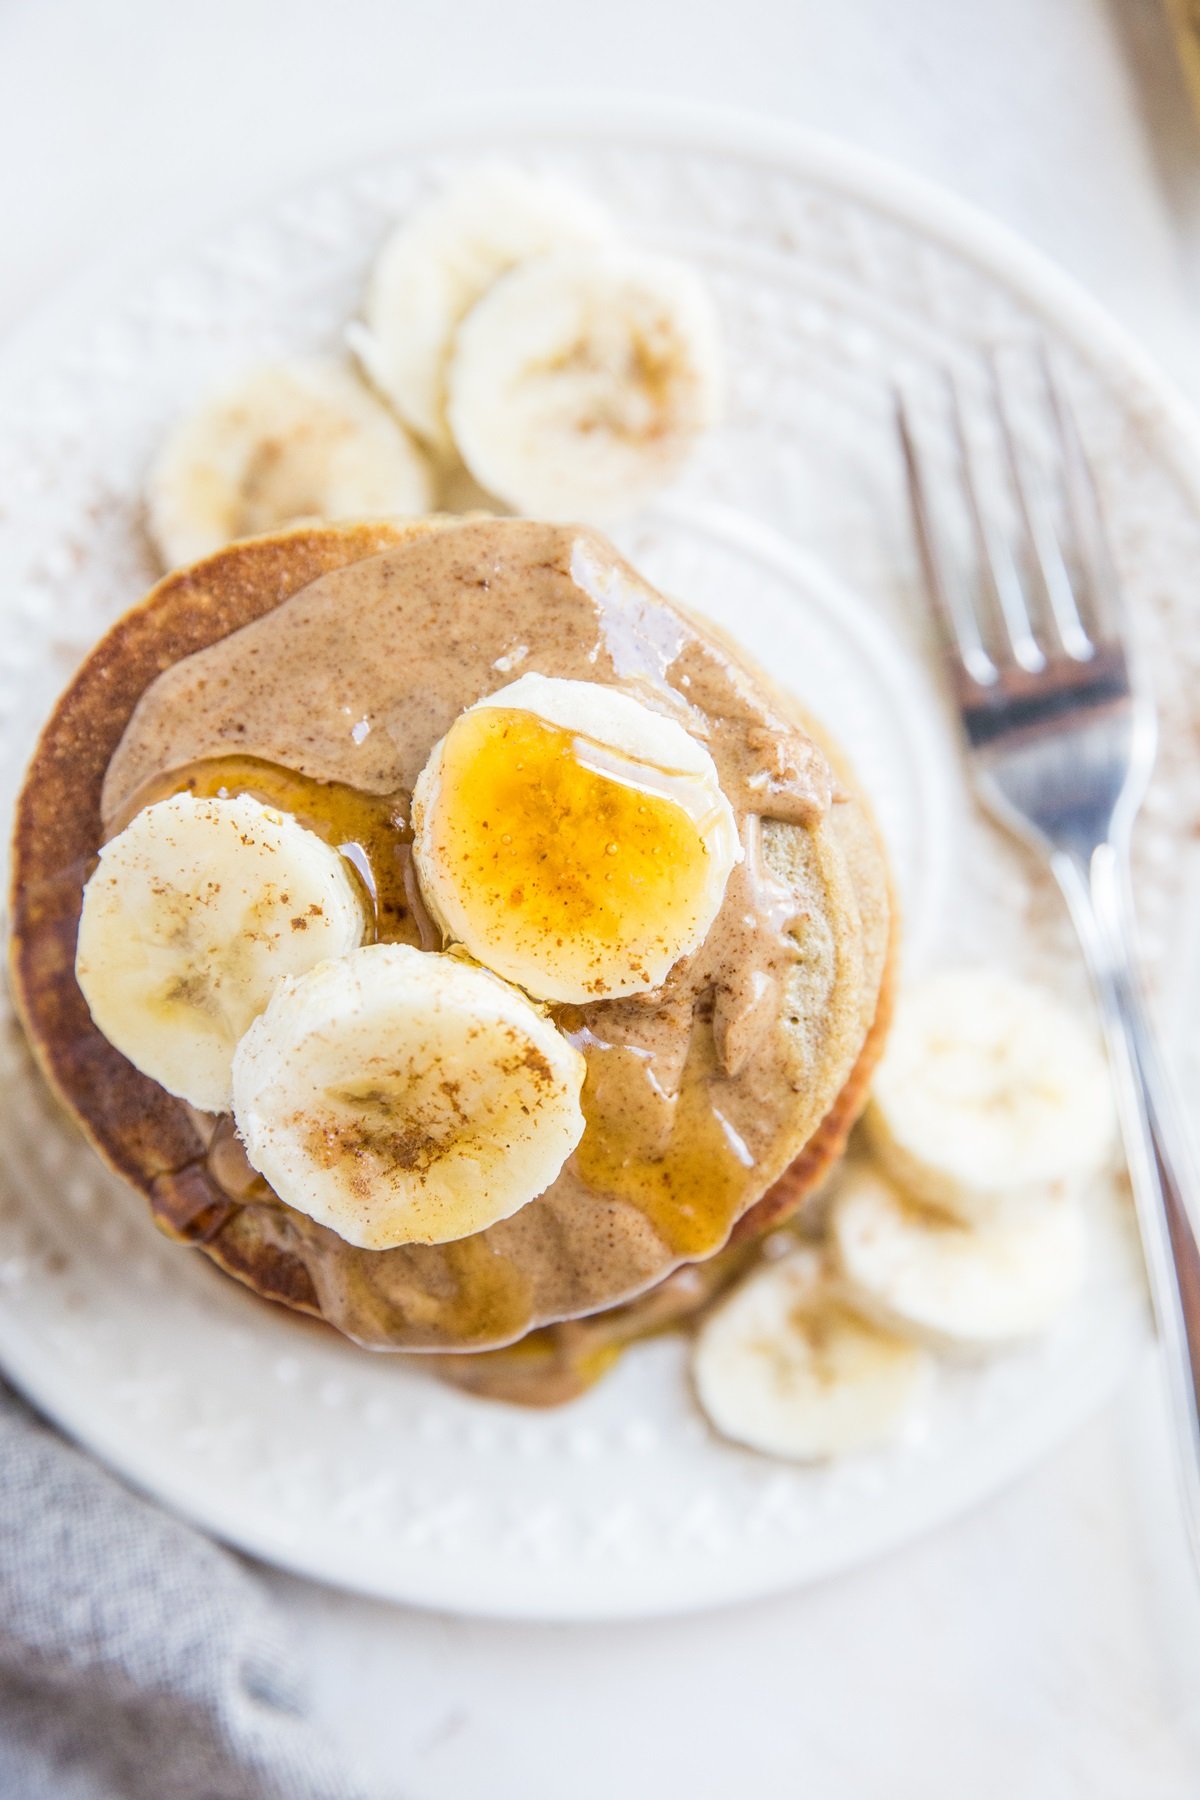 Healthy 6-Ingredient Gluten-Free Oatmeal Banana Pancakes made with quick oats. Flourless, dairy-free, gluten-free, fluffy and delicious